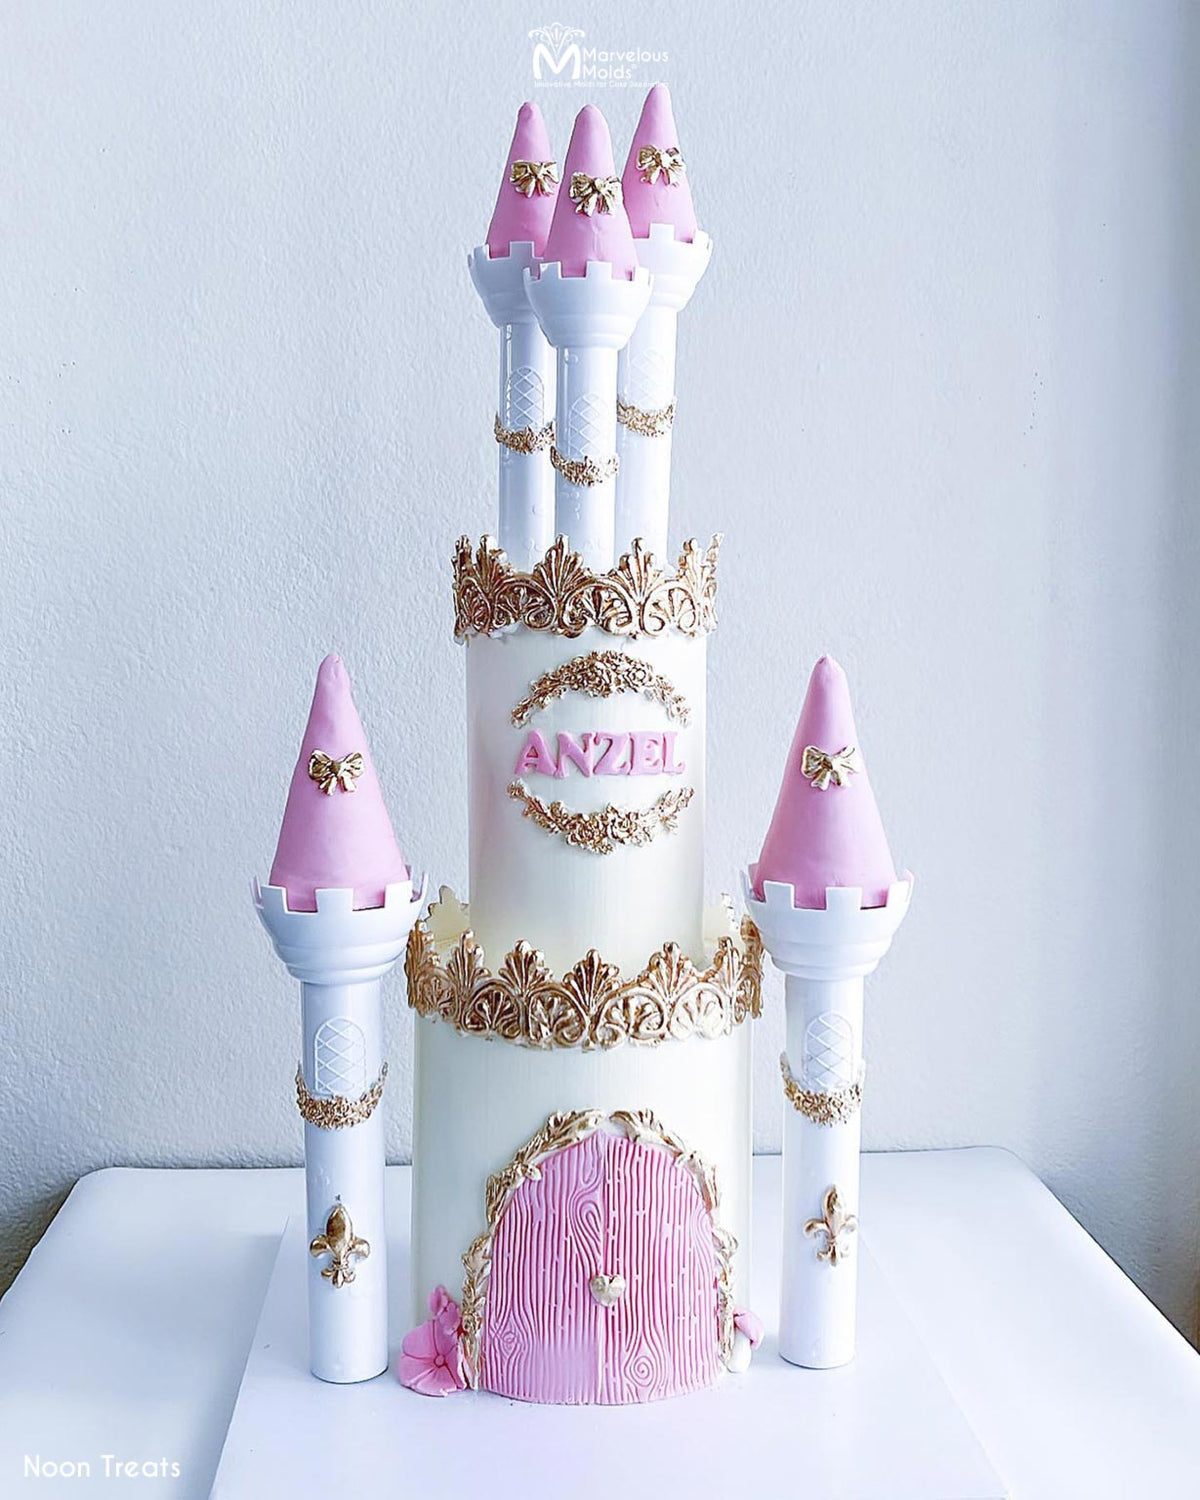 Princess Castle Cake with pink accents, decorated using Marvelous Molds Betty Lace Mold